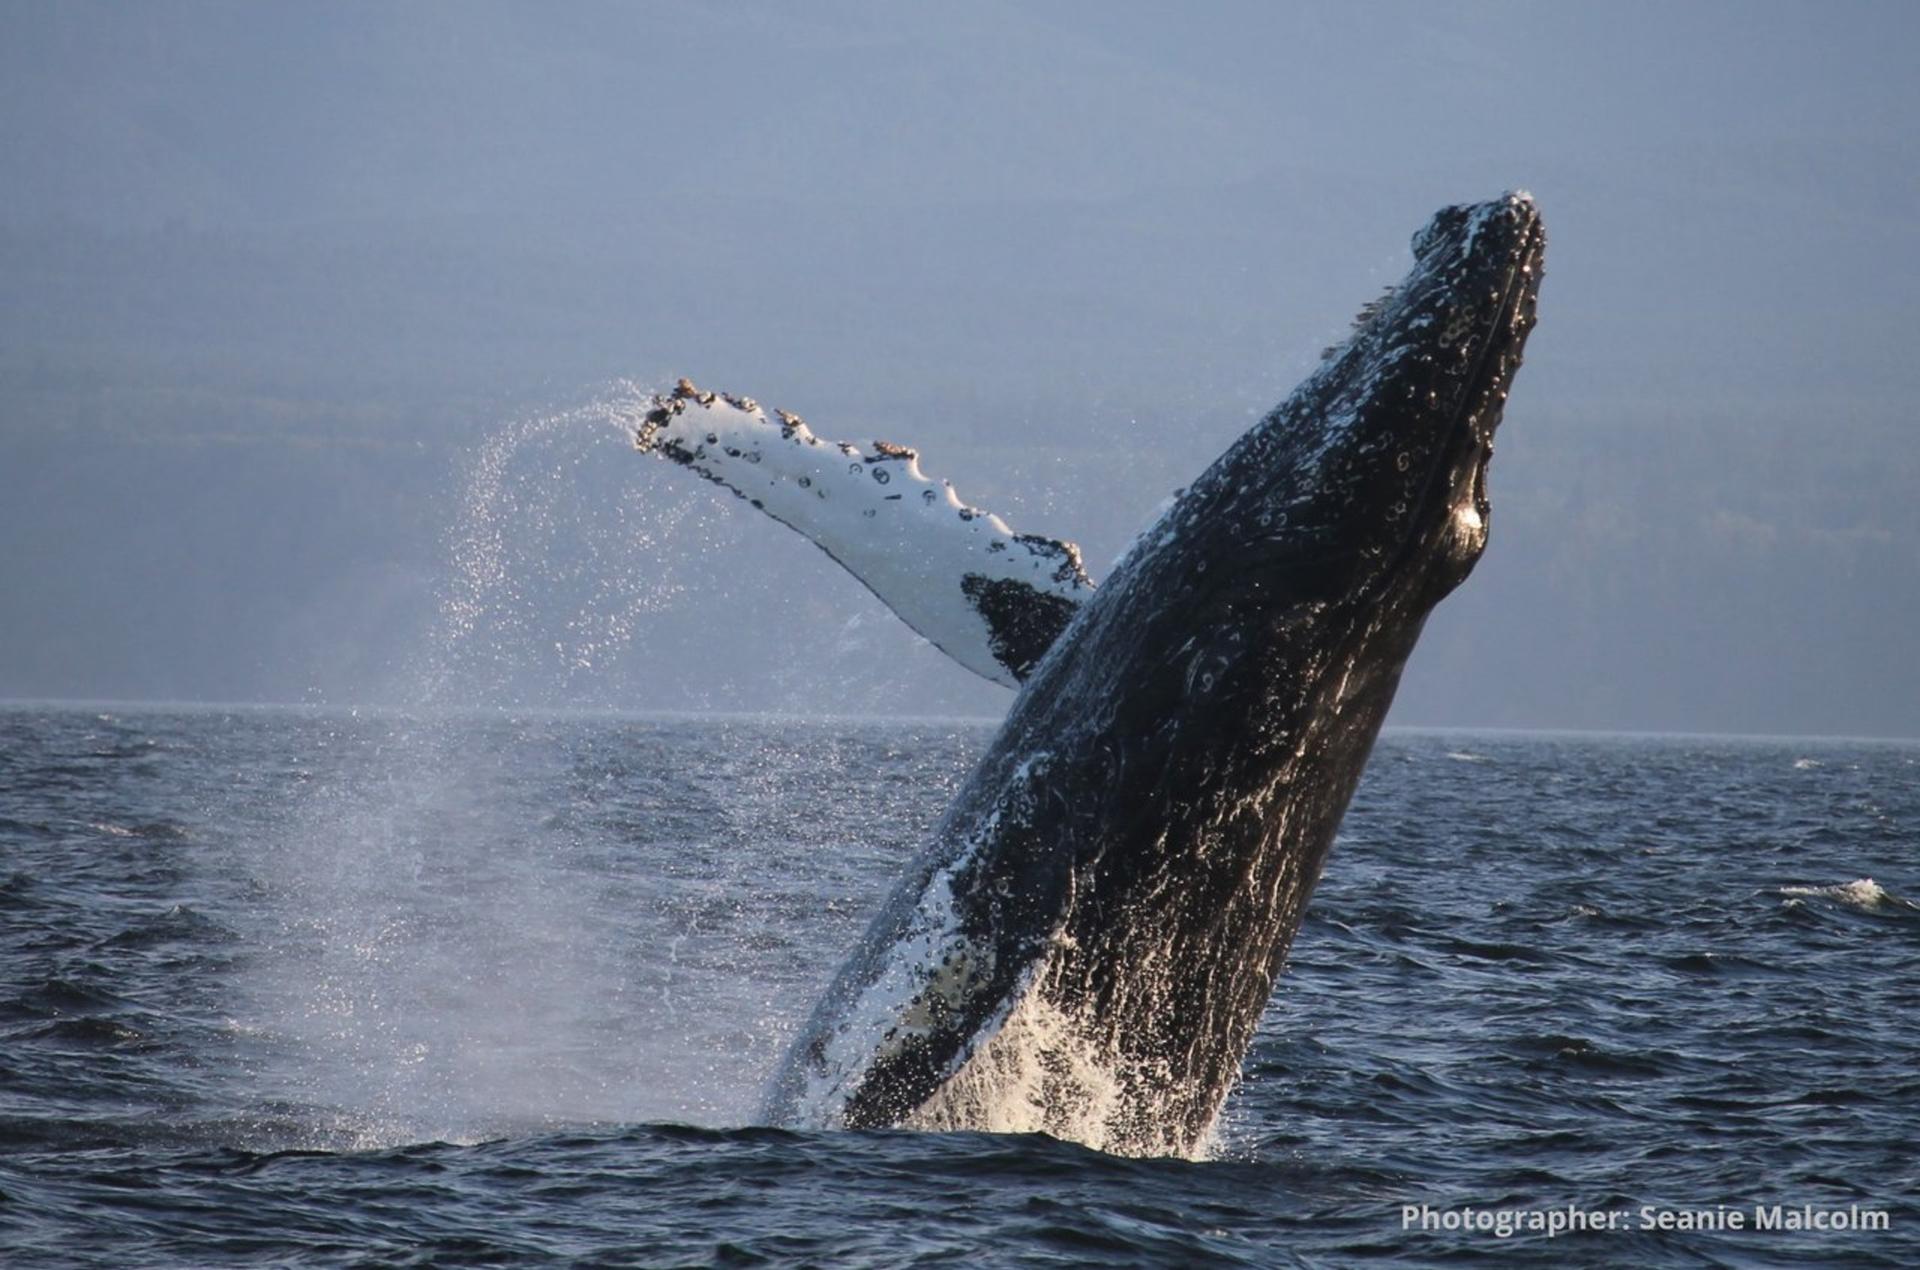 A humpback whale takes to the sky with a full breach!